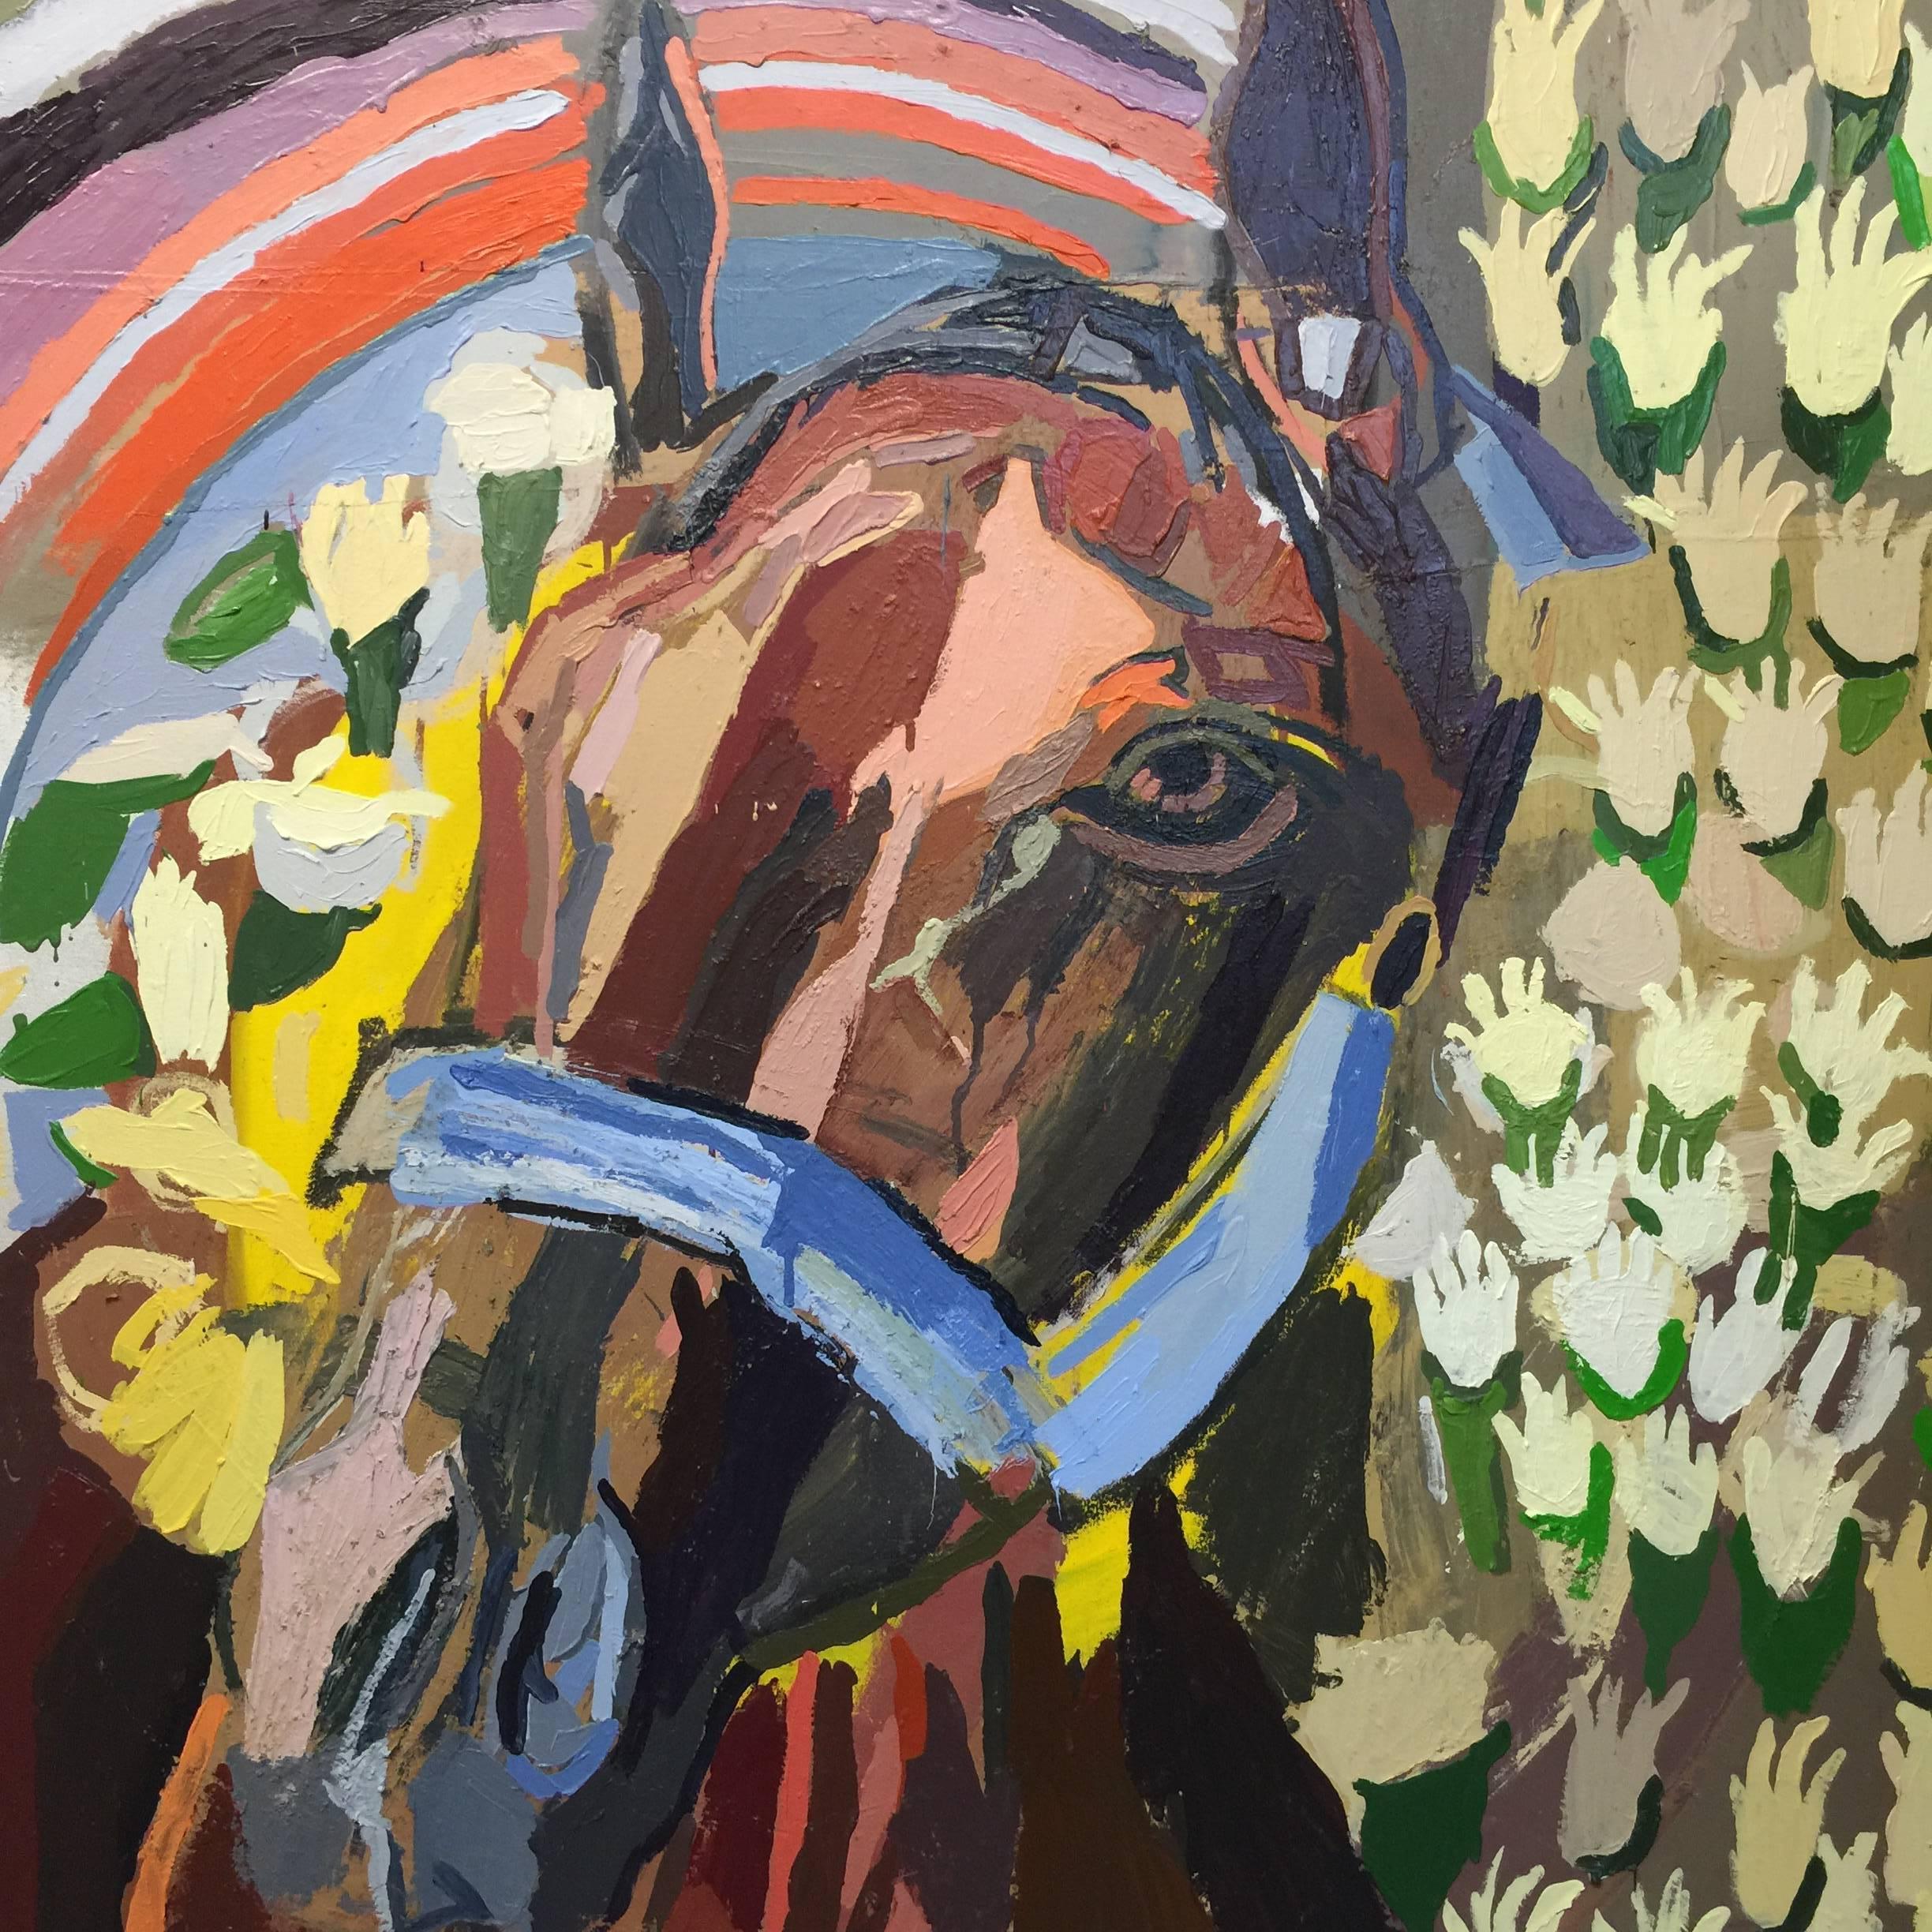 American Pharoah Oil Painting by New York City Artist Clintel Steed, 2015 For Sale 1